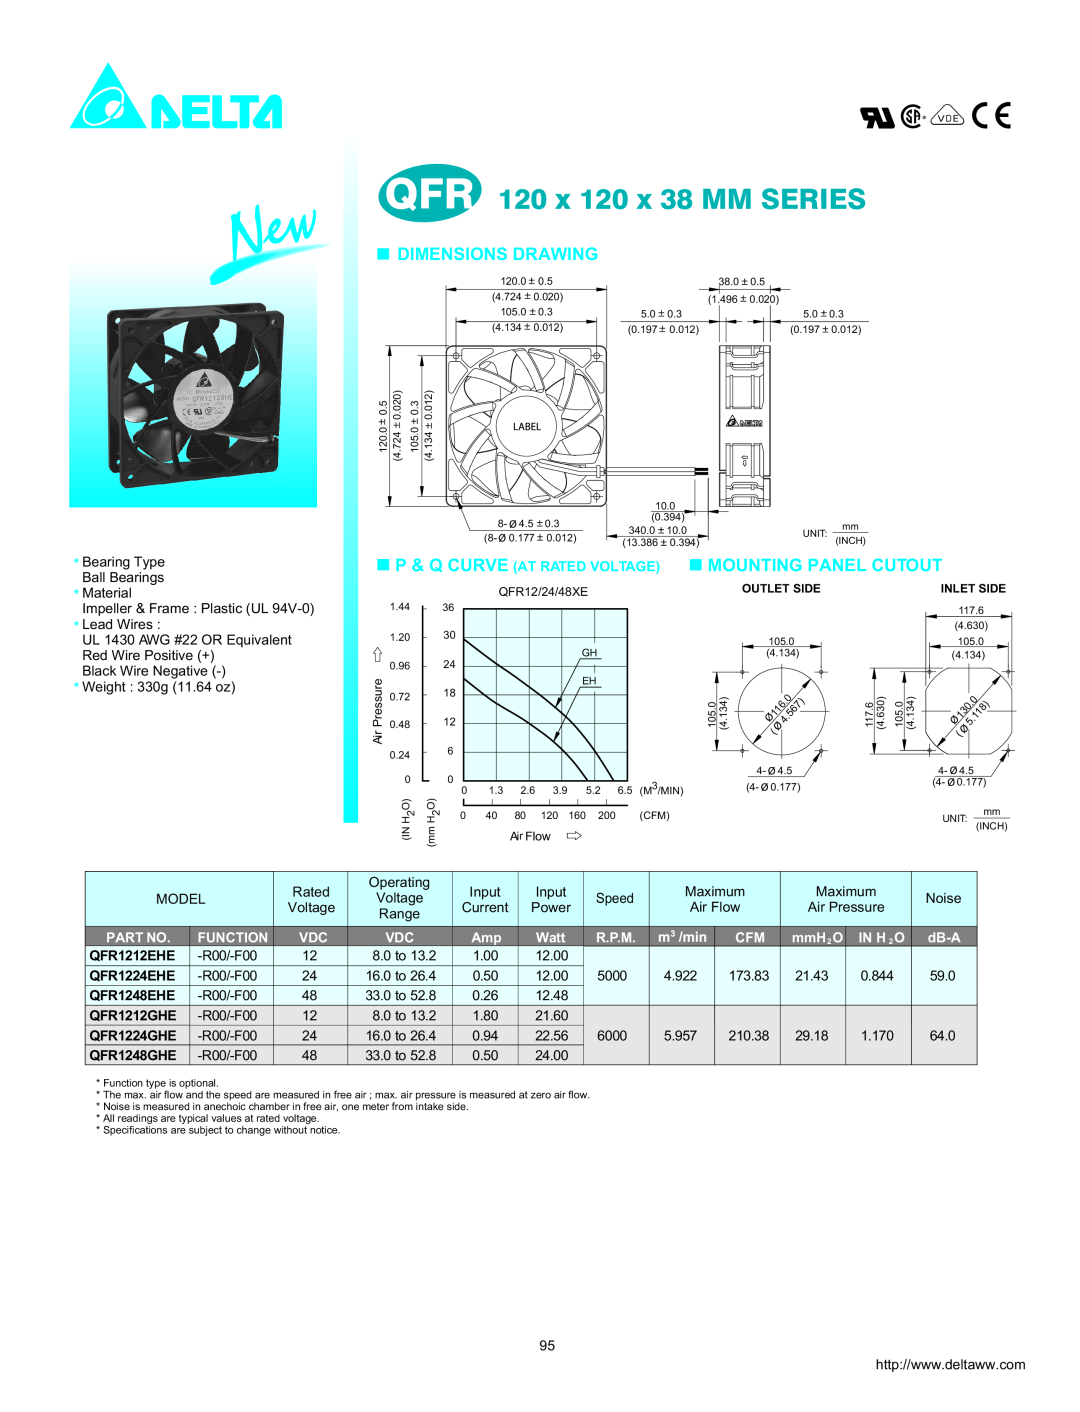 Delta Exhaust Fan dimensions QFR 120 x 120 x 38 MM SERIES, Dimensions Drawing, Mounting Panel Cutout, Function, QFR1212EHE 